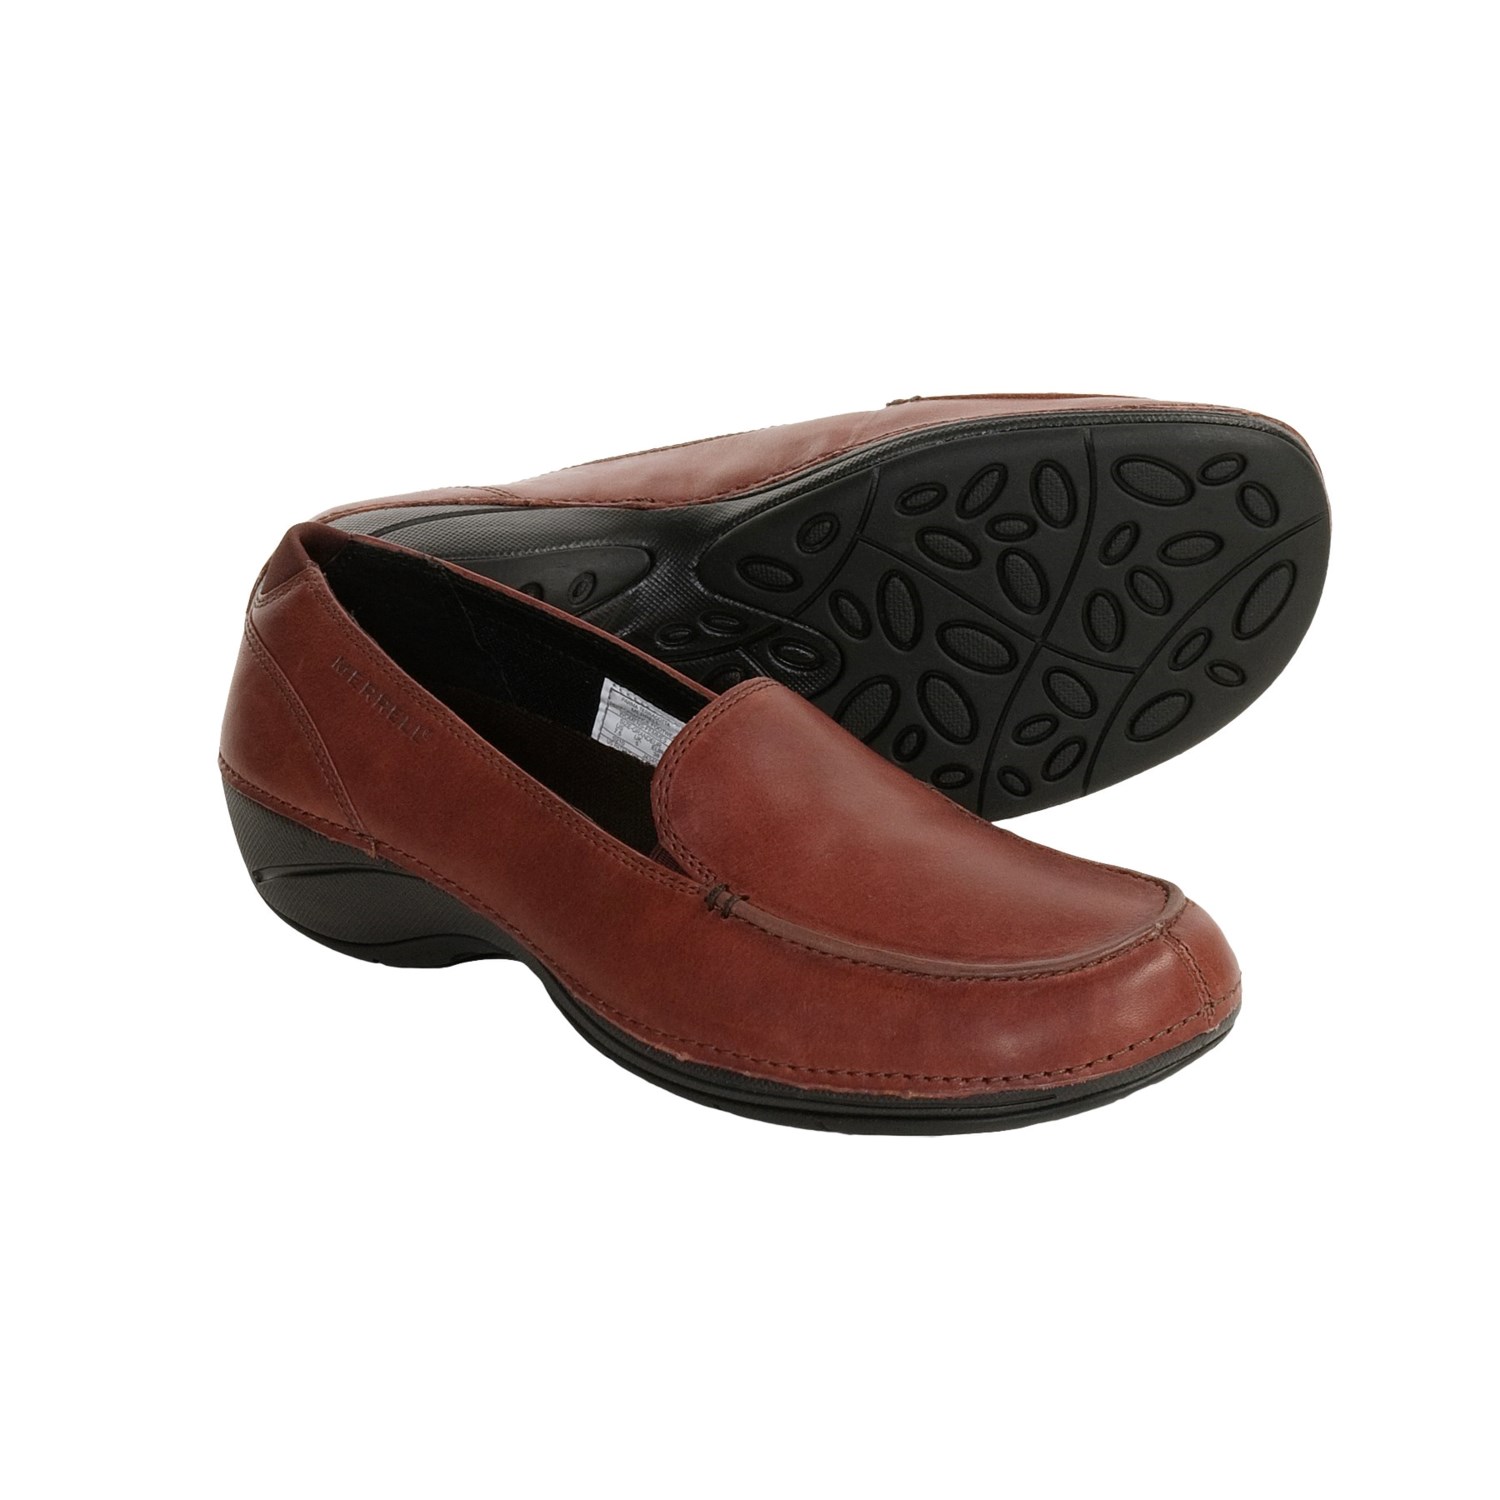 Merrell Parma Leather Shoes (For Women) 3258N - Save 30%